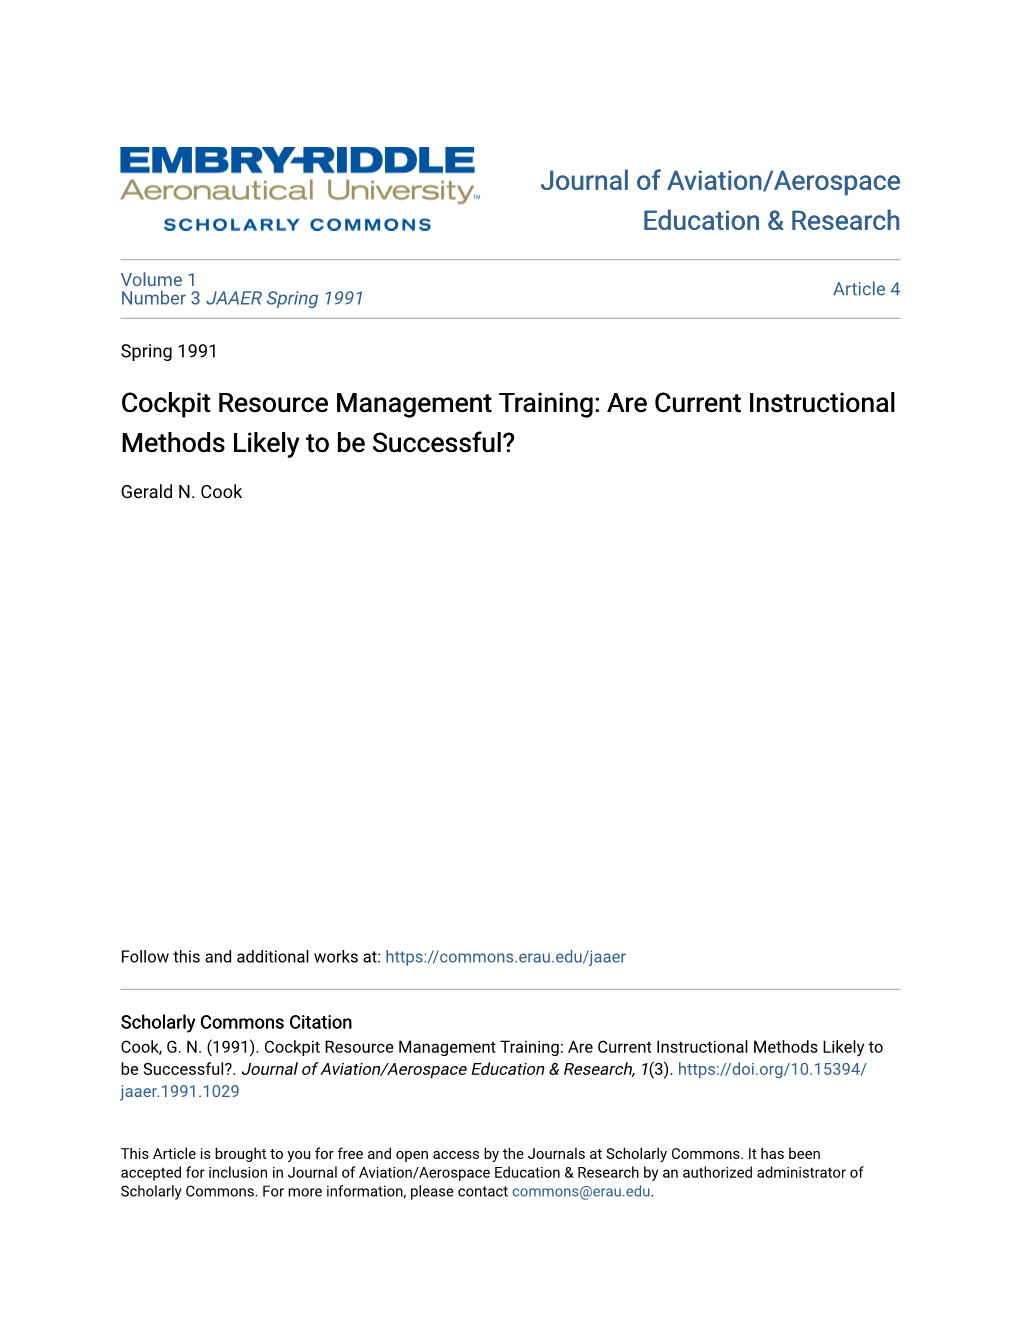 Cockpit Resource Management Training: Are Current Instructional Methods Likely to Be Successful?